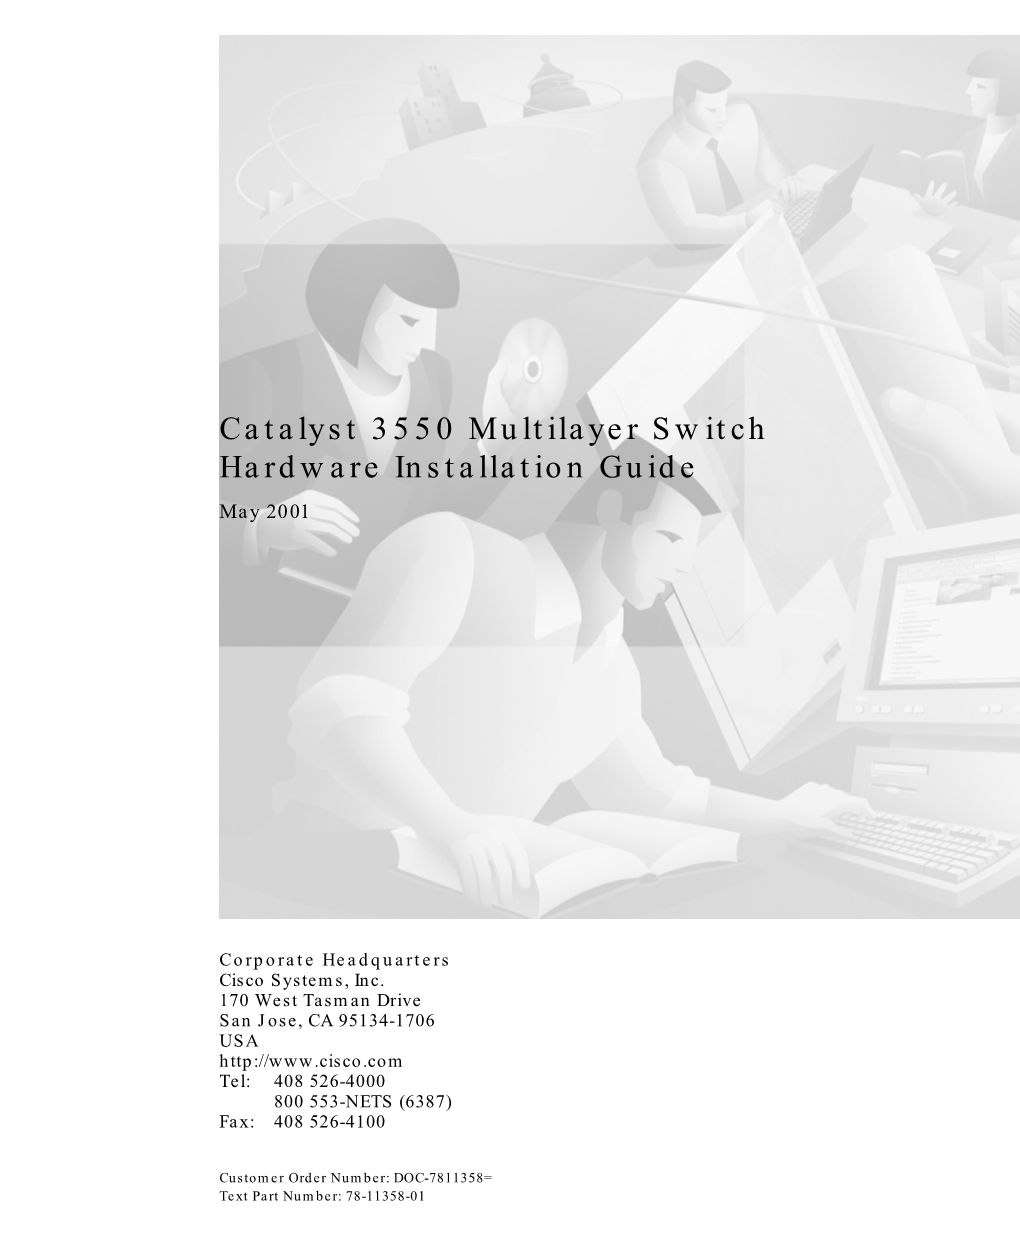 Catalyst 3550 Multilayer Switch Hardware Installation Guide May 2001